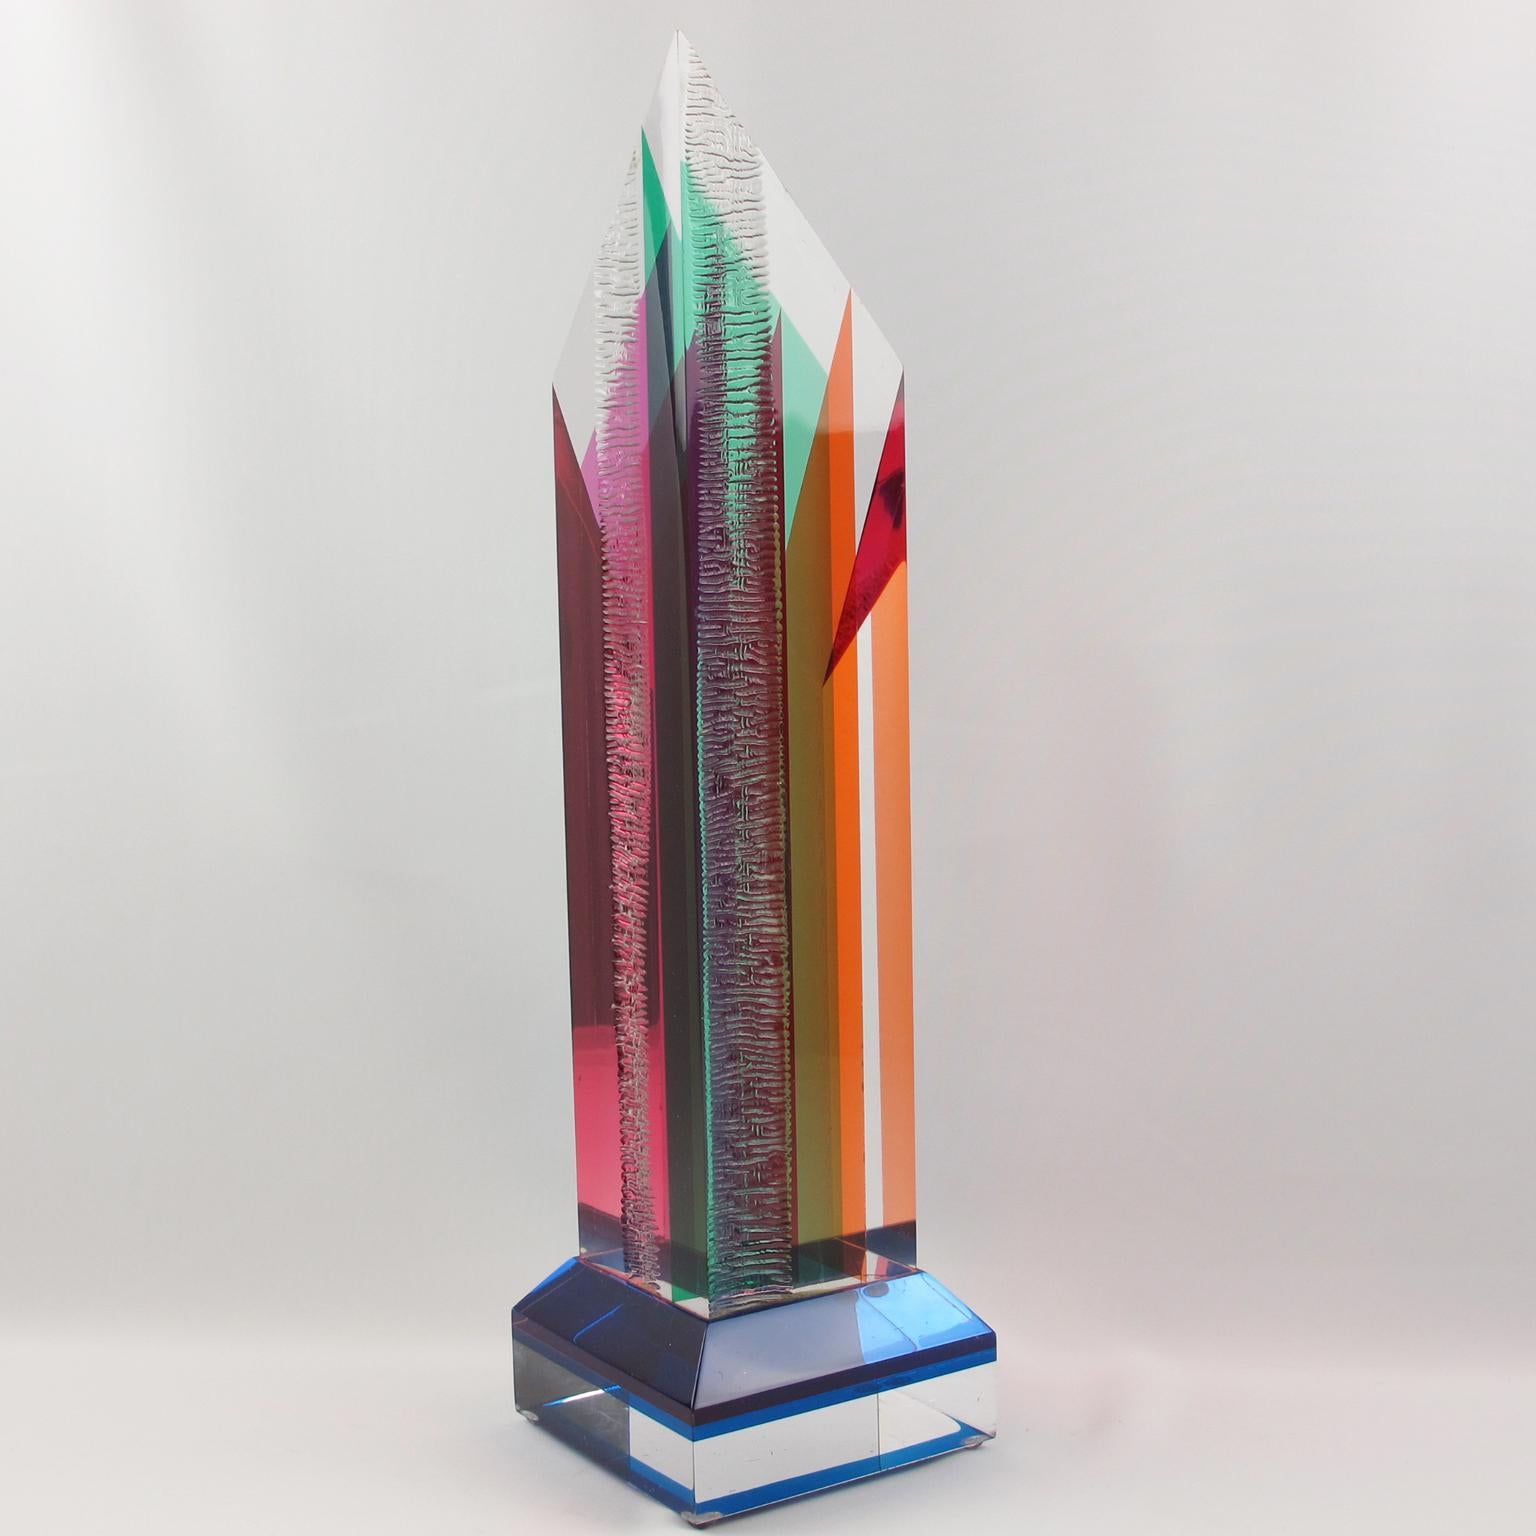 Impressive Lucite or Plexiglass sculpture or obelisk in the manner of Dale Morrow. Abstract geometrical, prismatic sculpture, colorful and interesting as lots of different optical effects are created thanks to the skyscraper shape and carving.